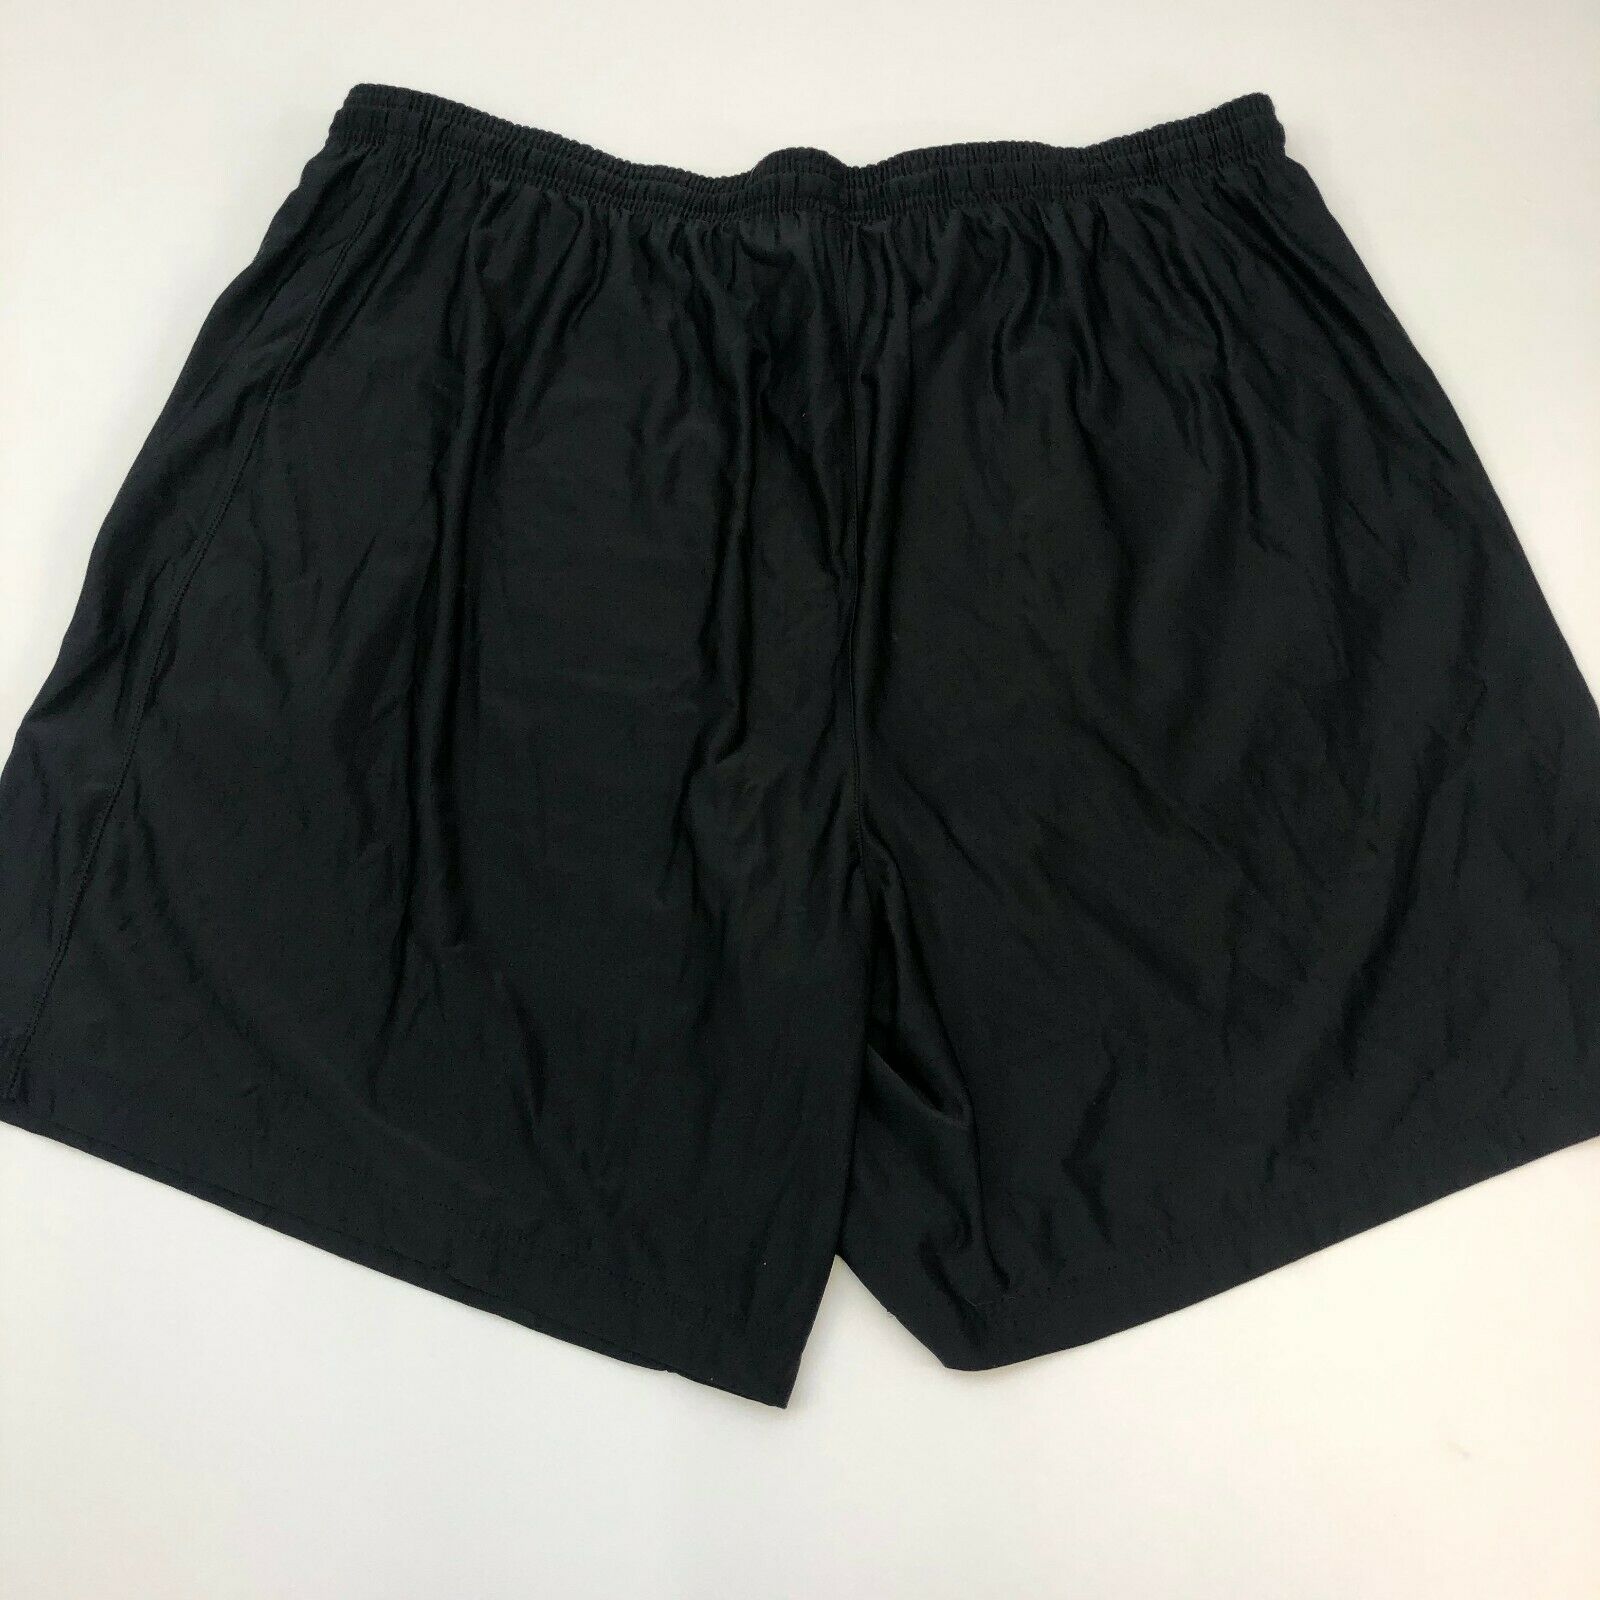 Starter Athletic Shorts Mens XXL Black Polyester Casual Workout - Shorts